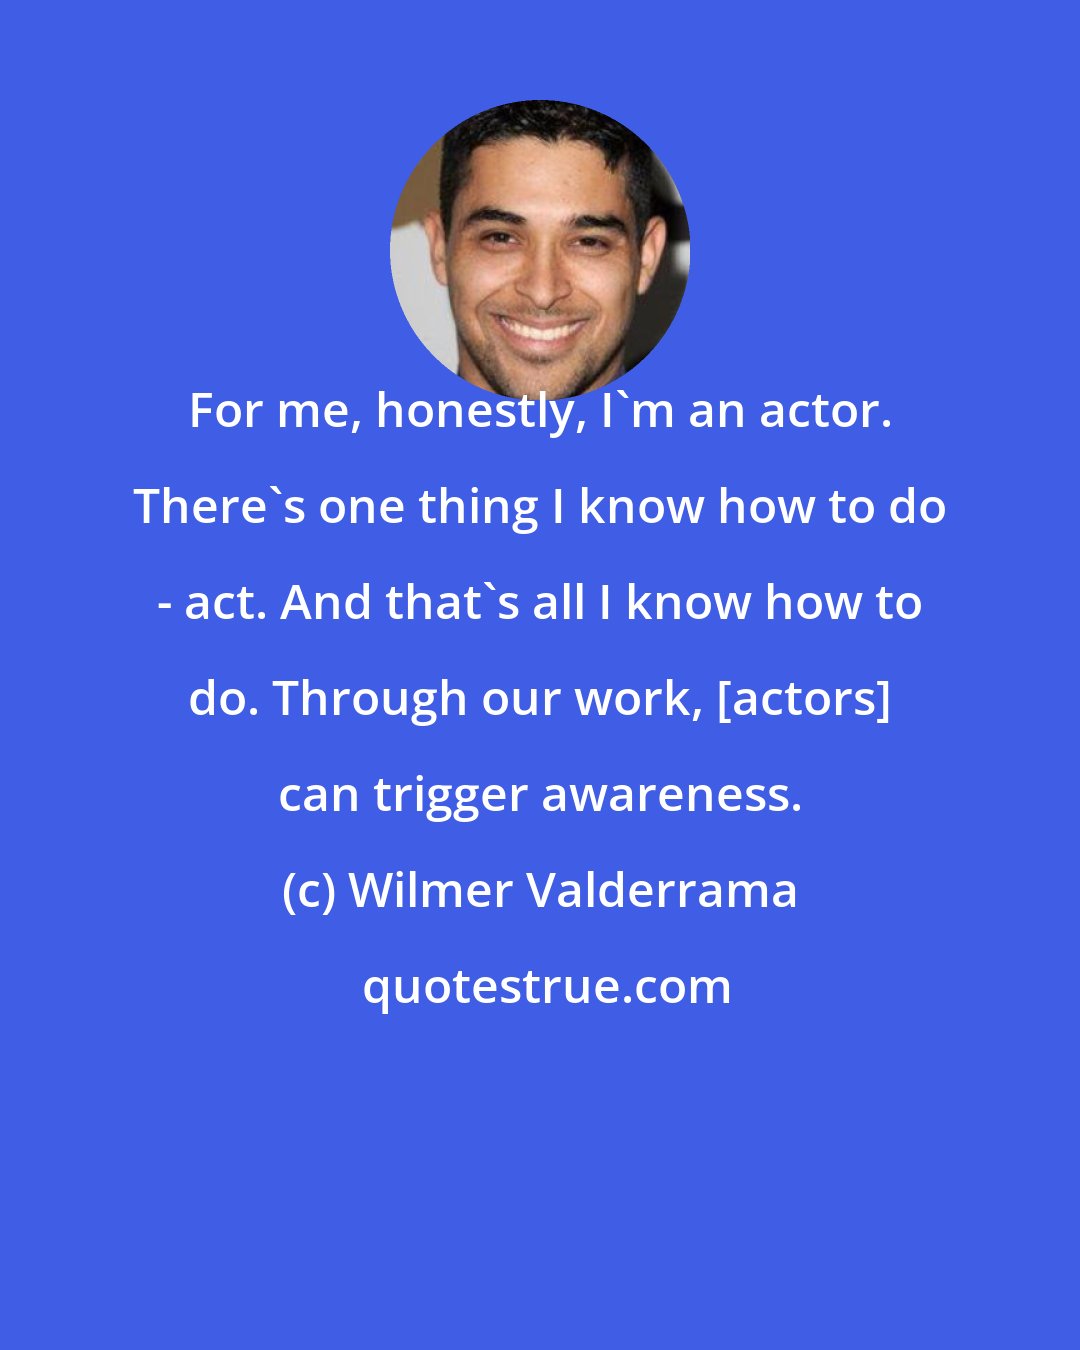 Wilmer Valderrama: For me, honestly, I'm an actor. There's one thing I know how to do - act. And that's all I know how to do. Through our work, [actors] can trigger awareness.